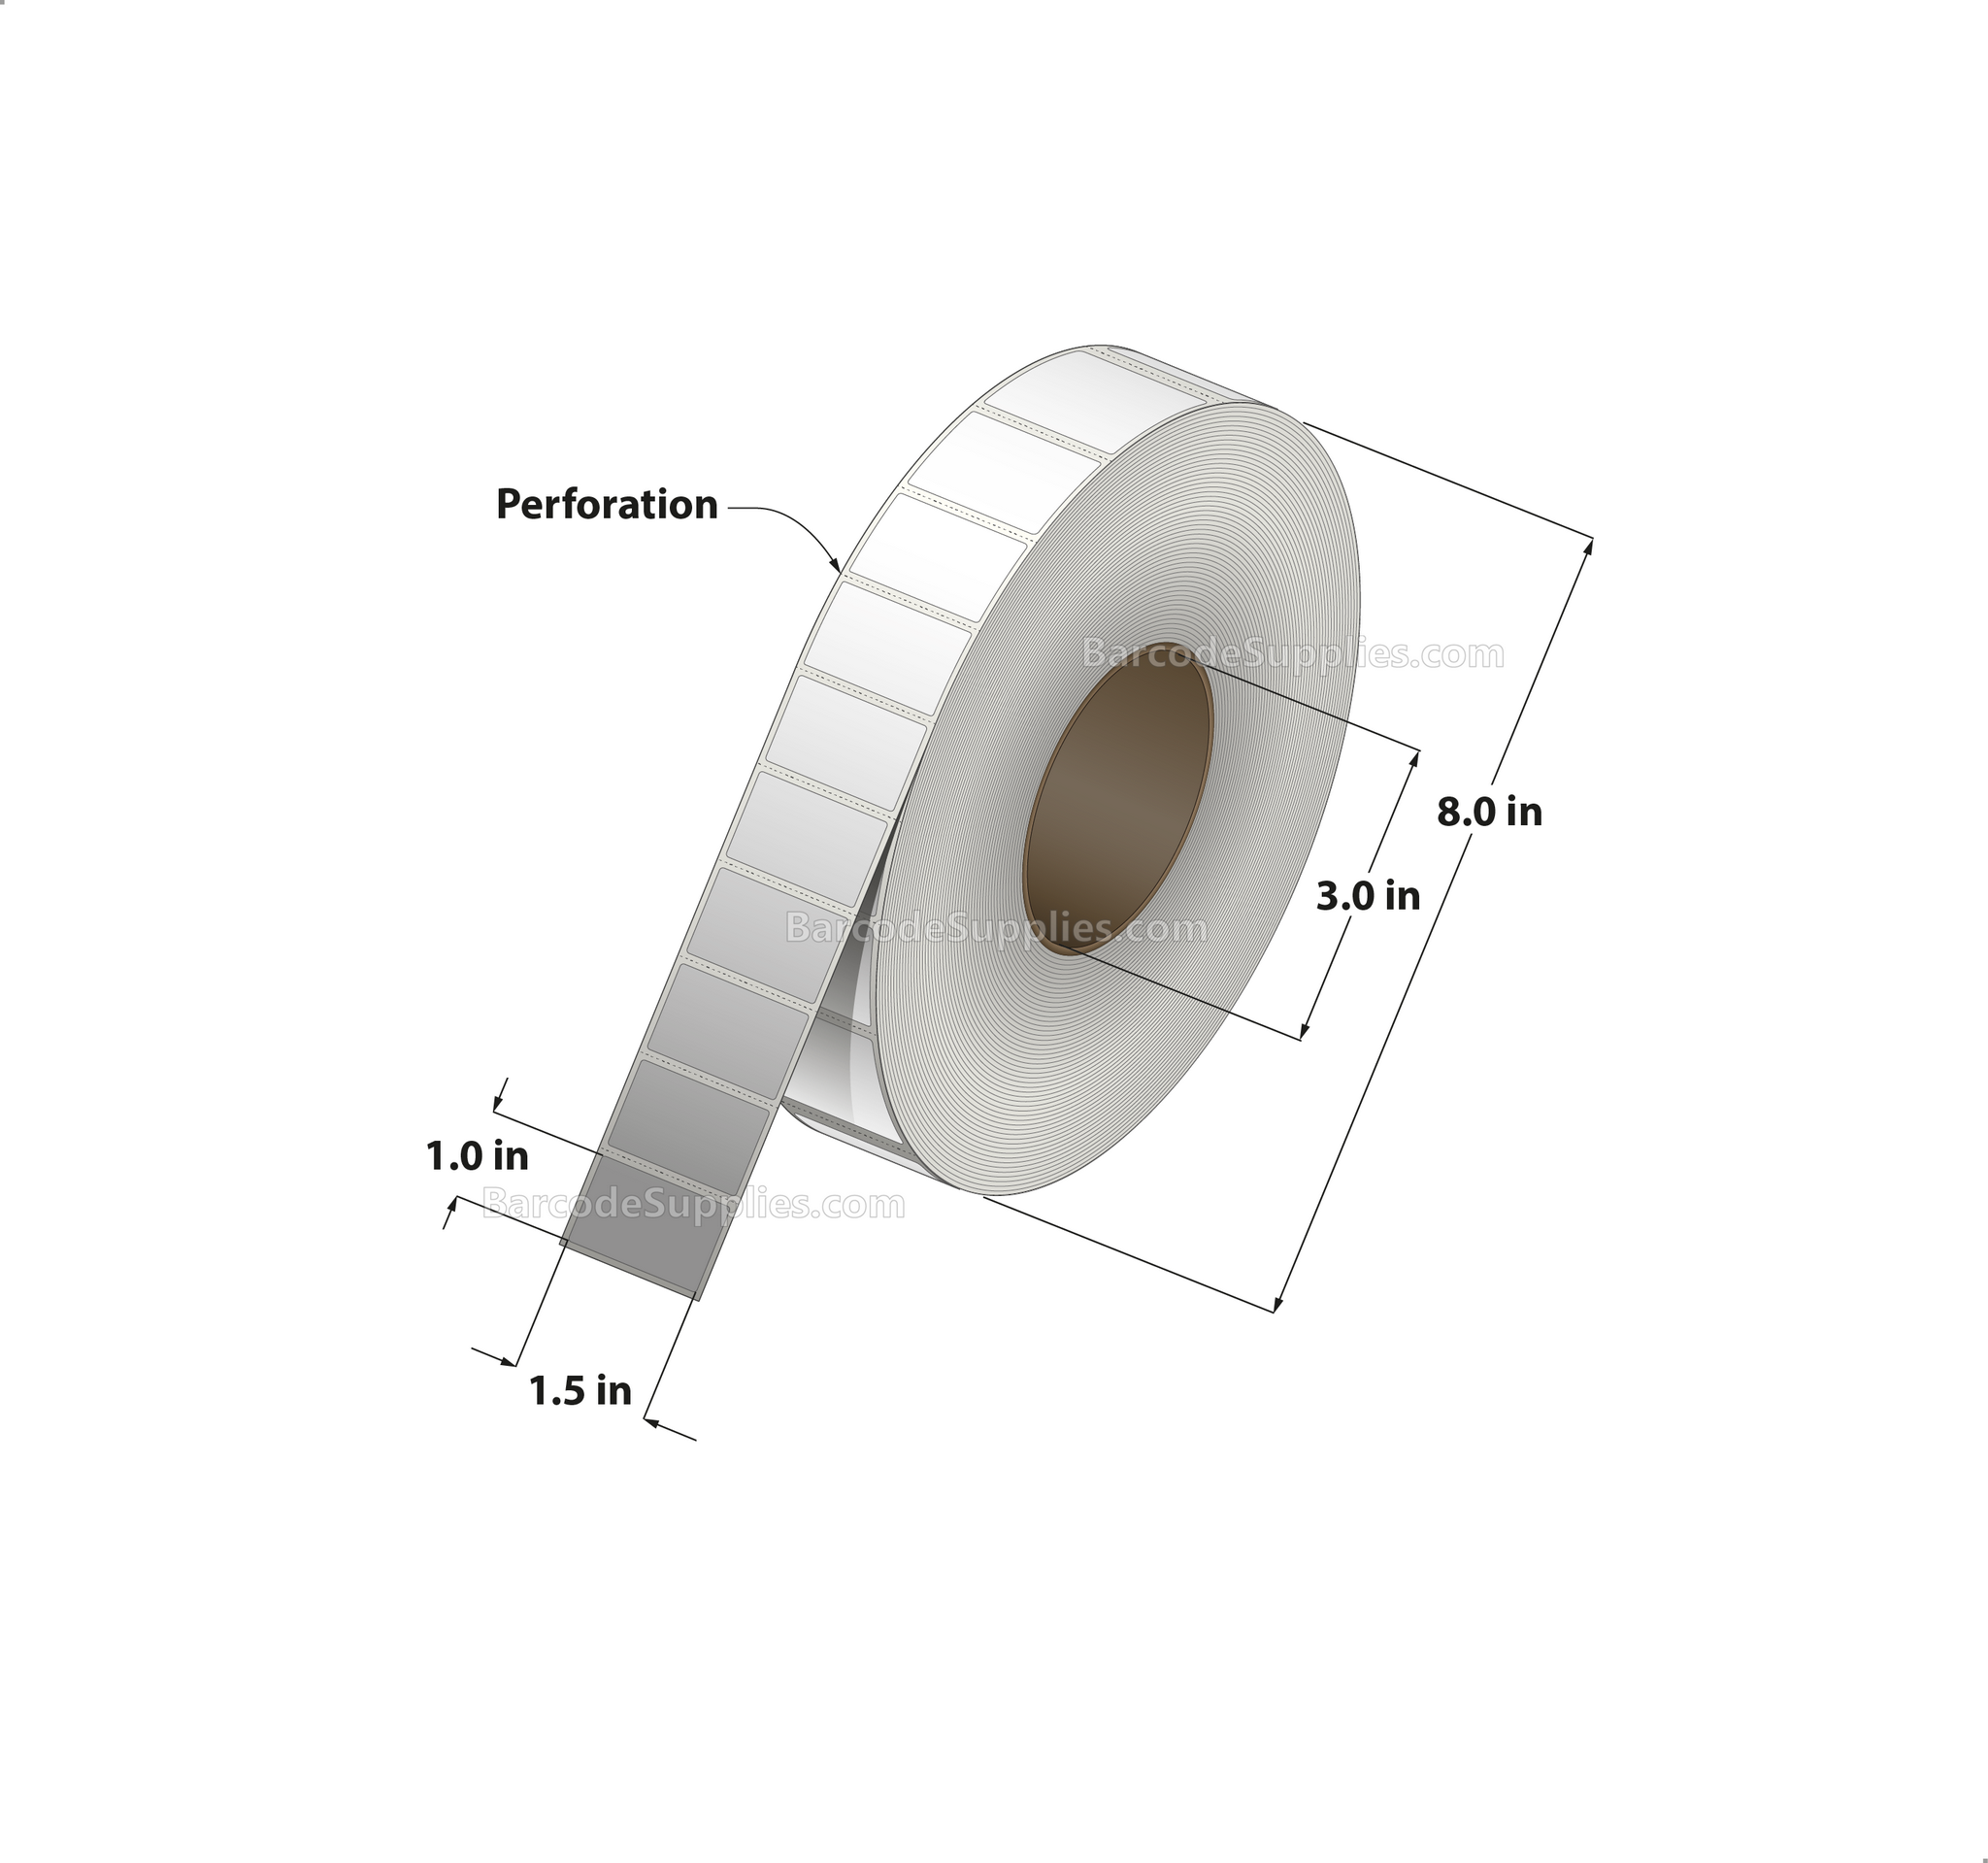 1.5 x 1 Thermal Transfer White Labels With Permanent Adhesive - Perforated - 5500 Labels Per Roll - Carton Of 8 Rolls - 44000 Labels Total - MPN: RT-15-1-5500-3